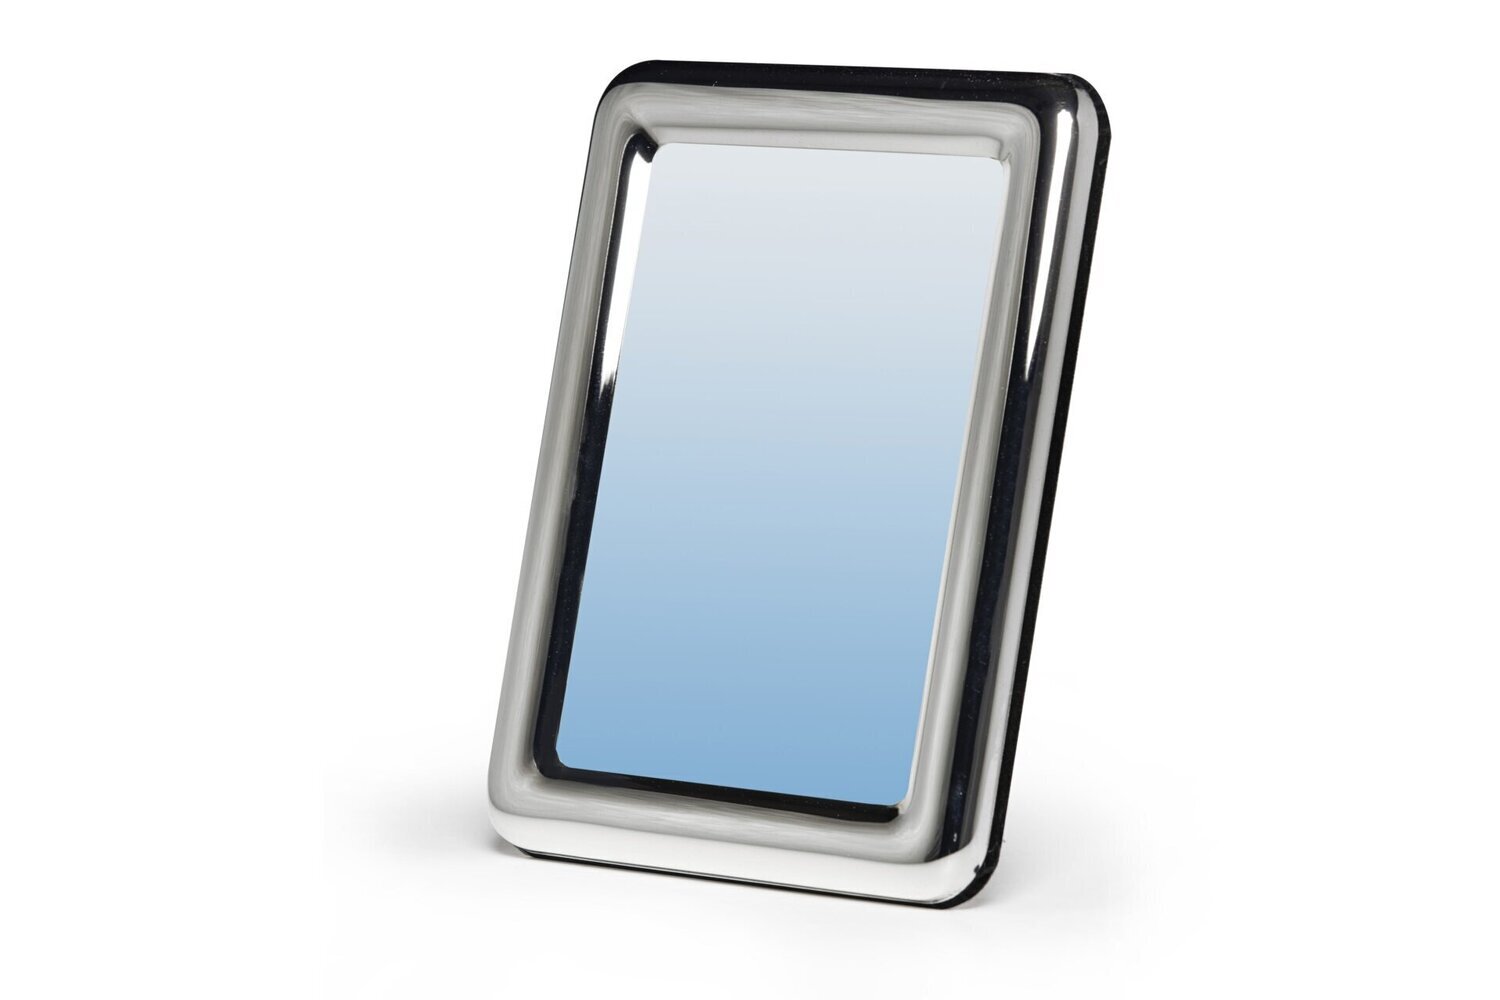 Polished silver plated frame